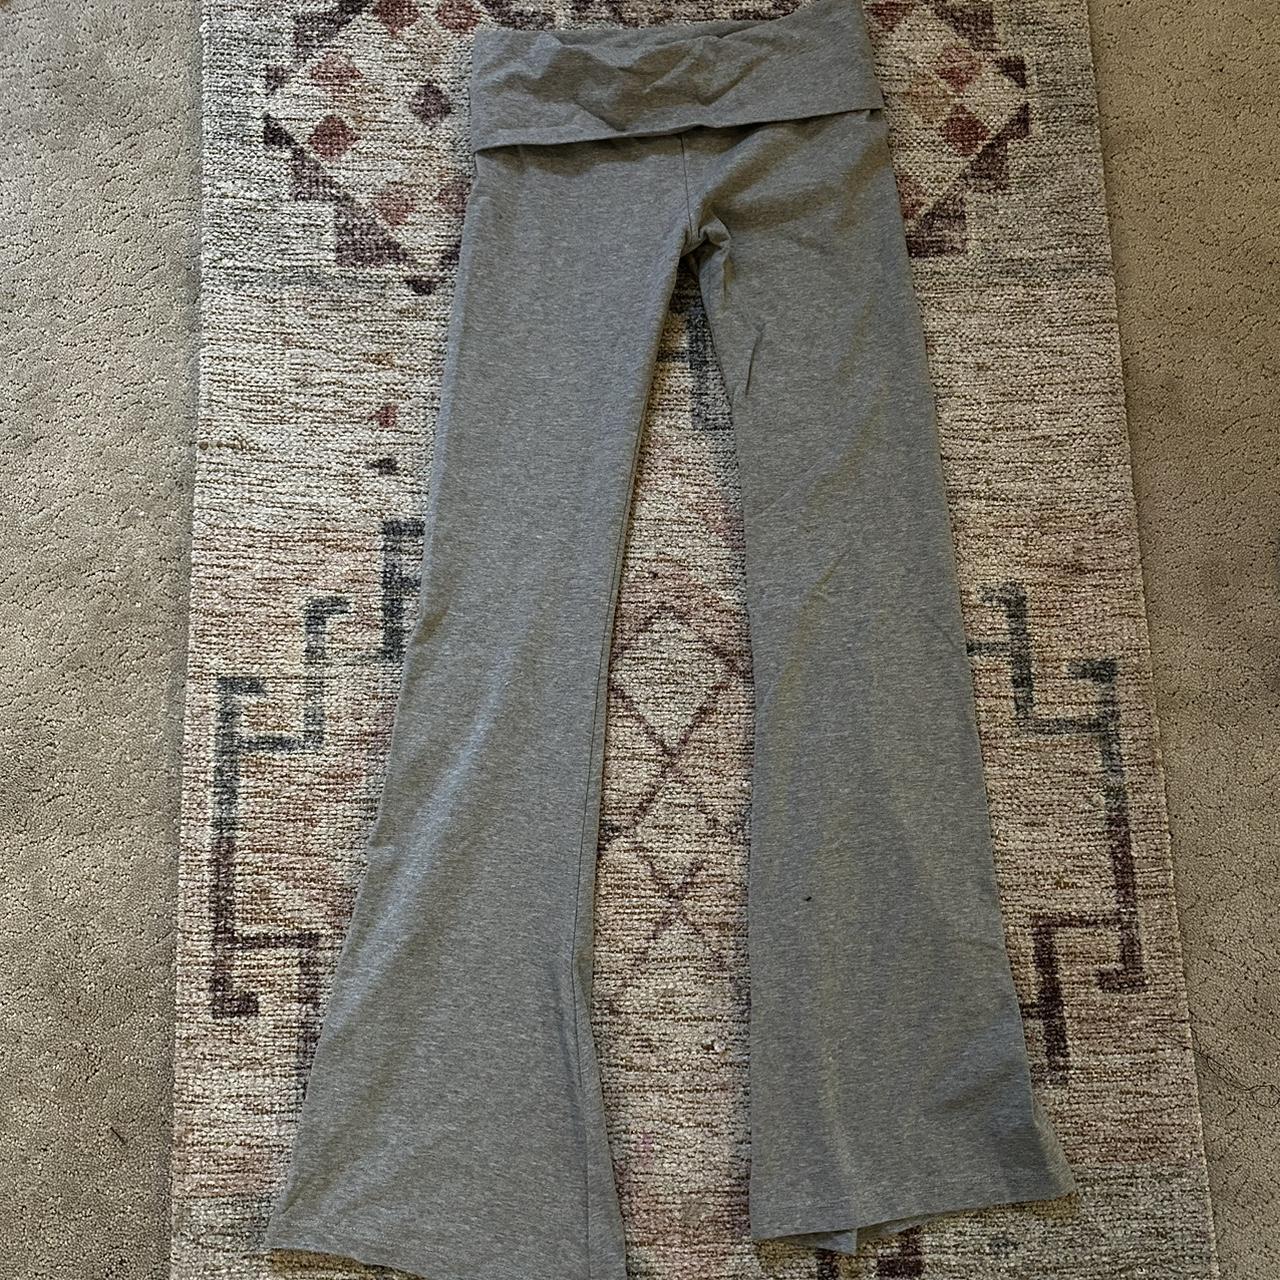 90 DEGREE'S LEGGINGS classic sage color size small - Depop